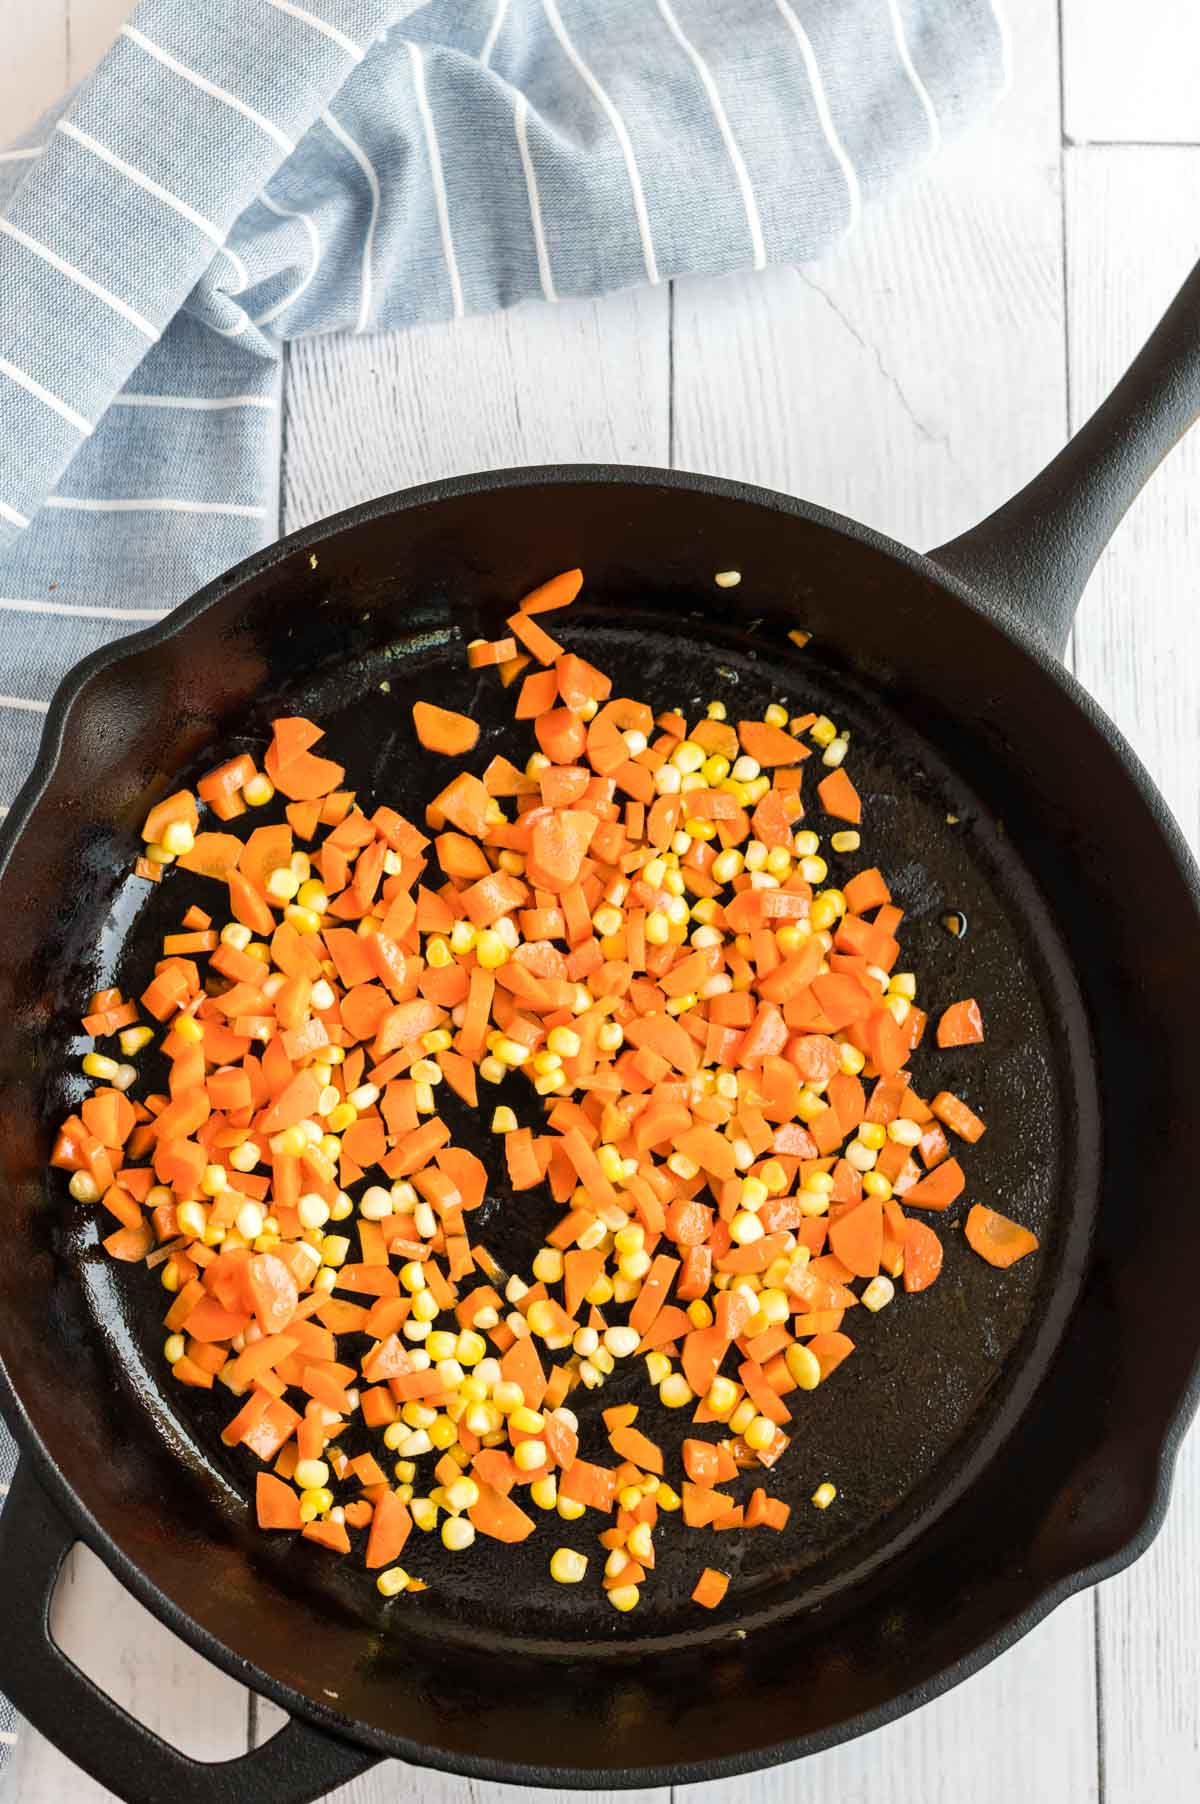 Chopped carrots and corn in a cast iron pan